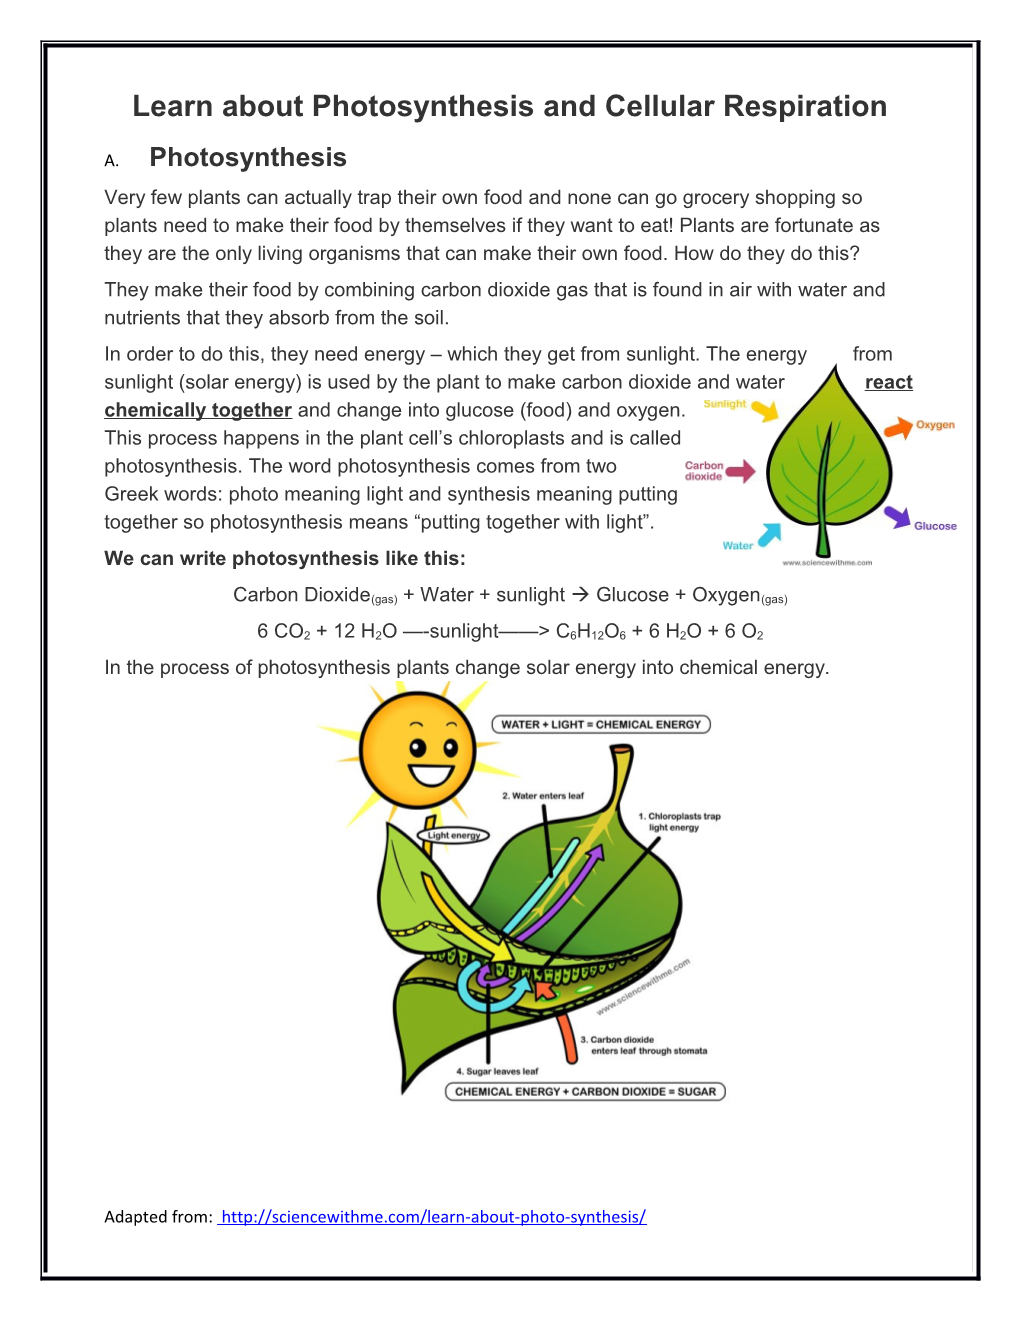 Learn About Photosynthesis and Cellular Respiration